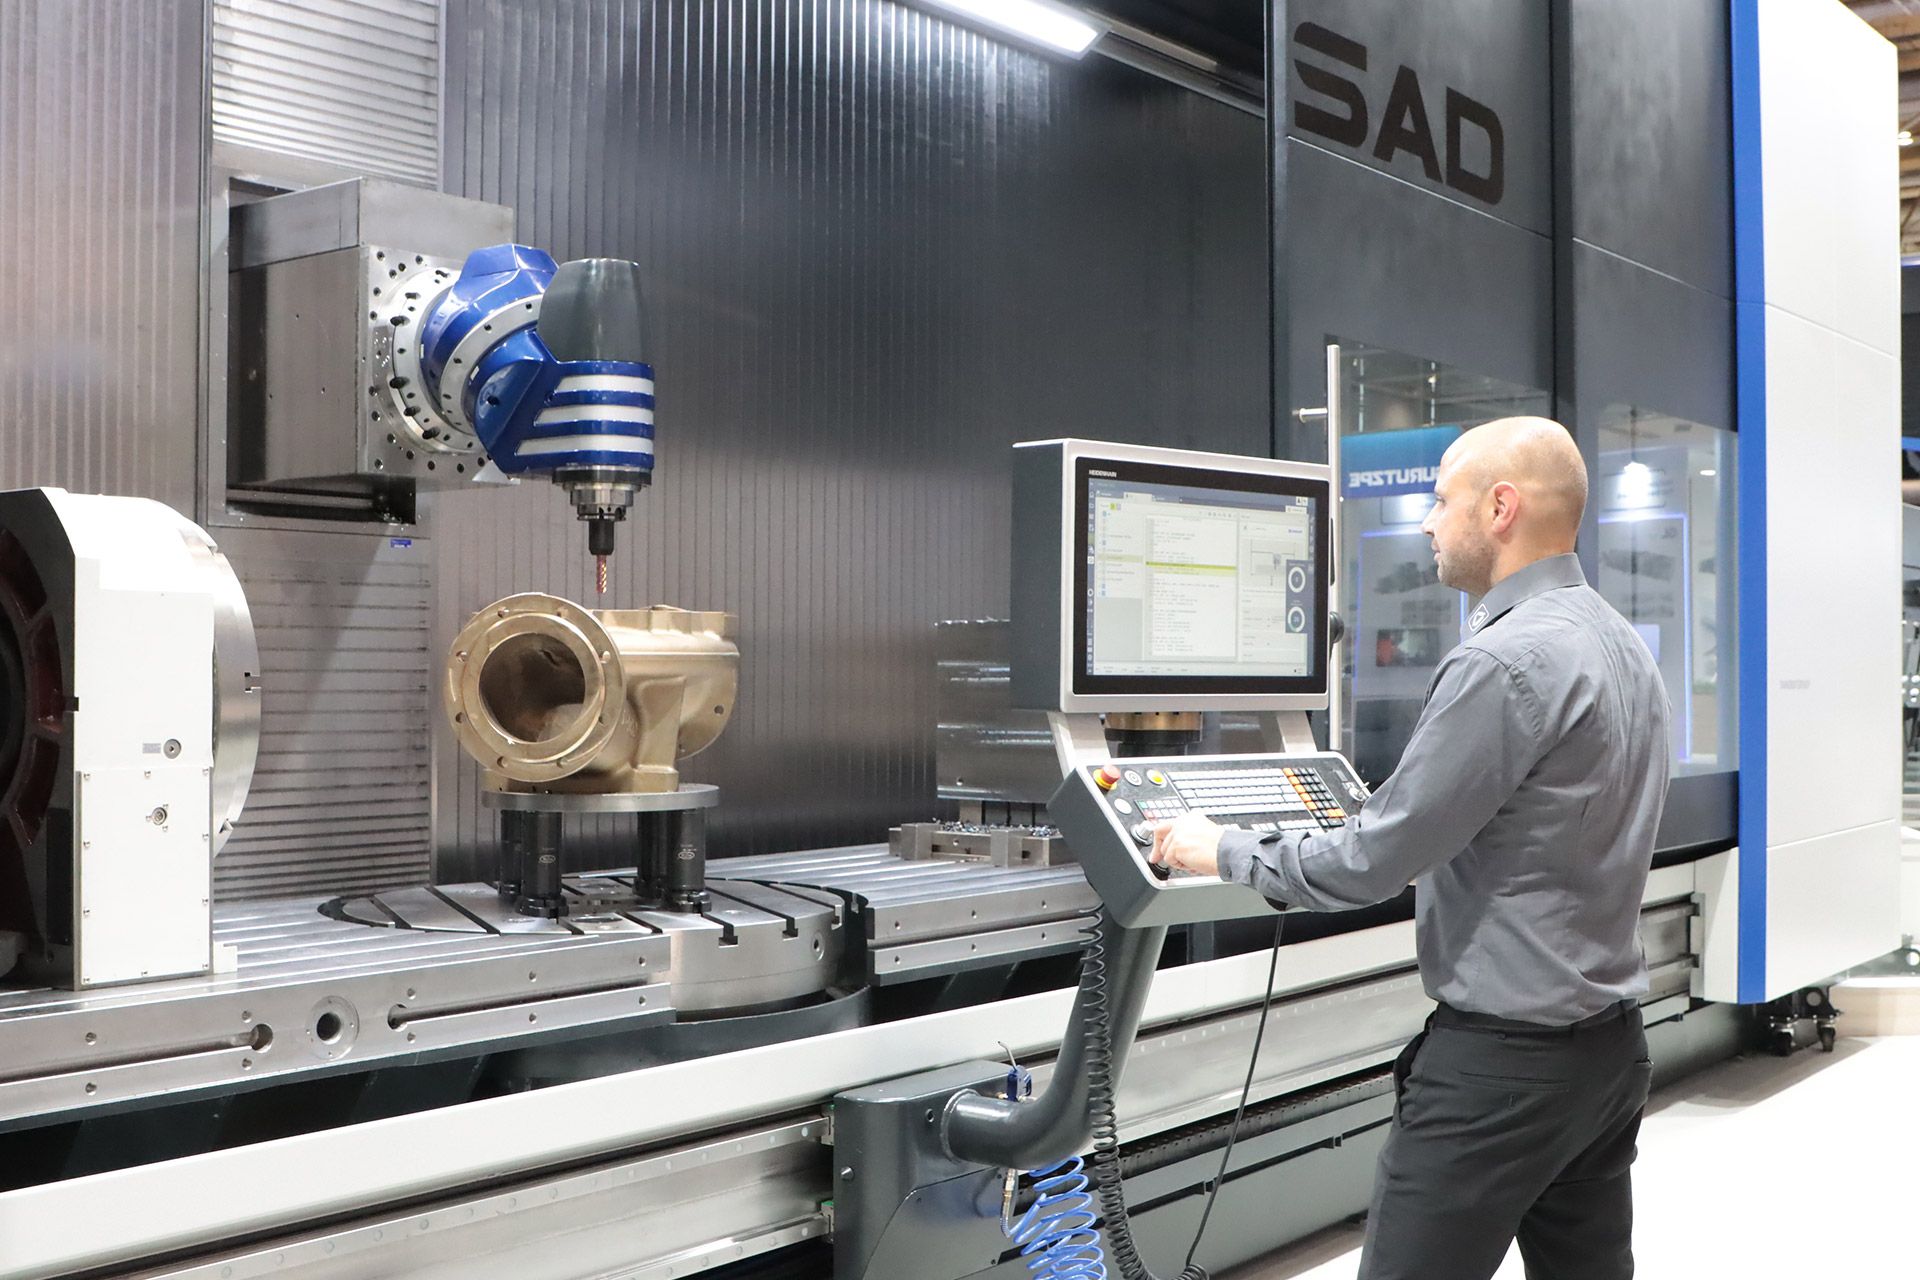 Soraluce offers an extensive portfolio encompassing milling machines, boring machines, vertical lathes, multifunctional solutions, and automated systems and production lines